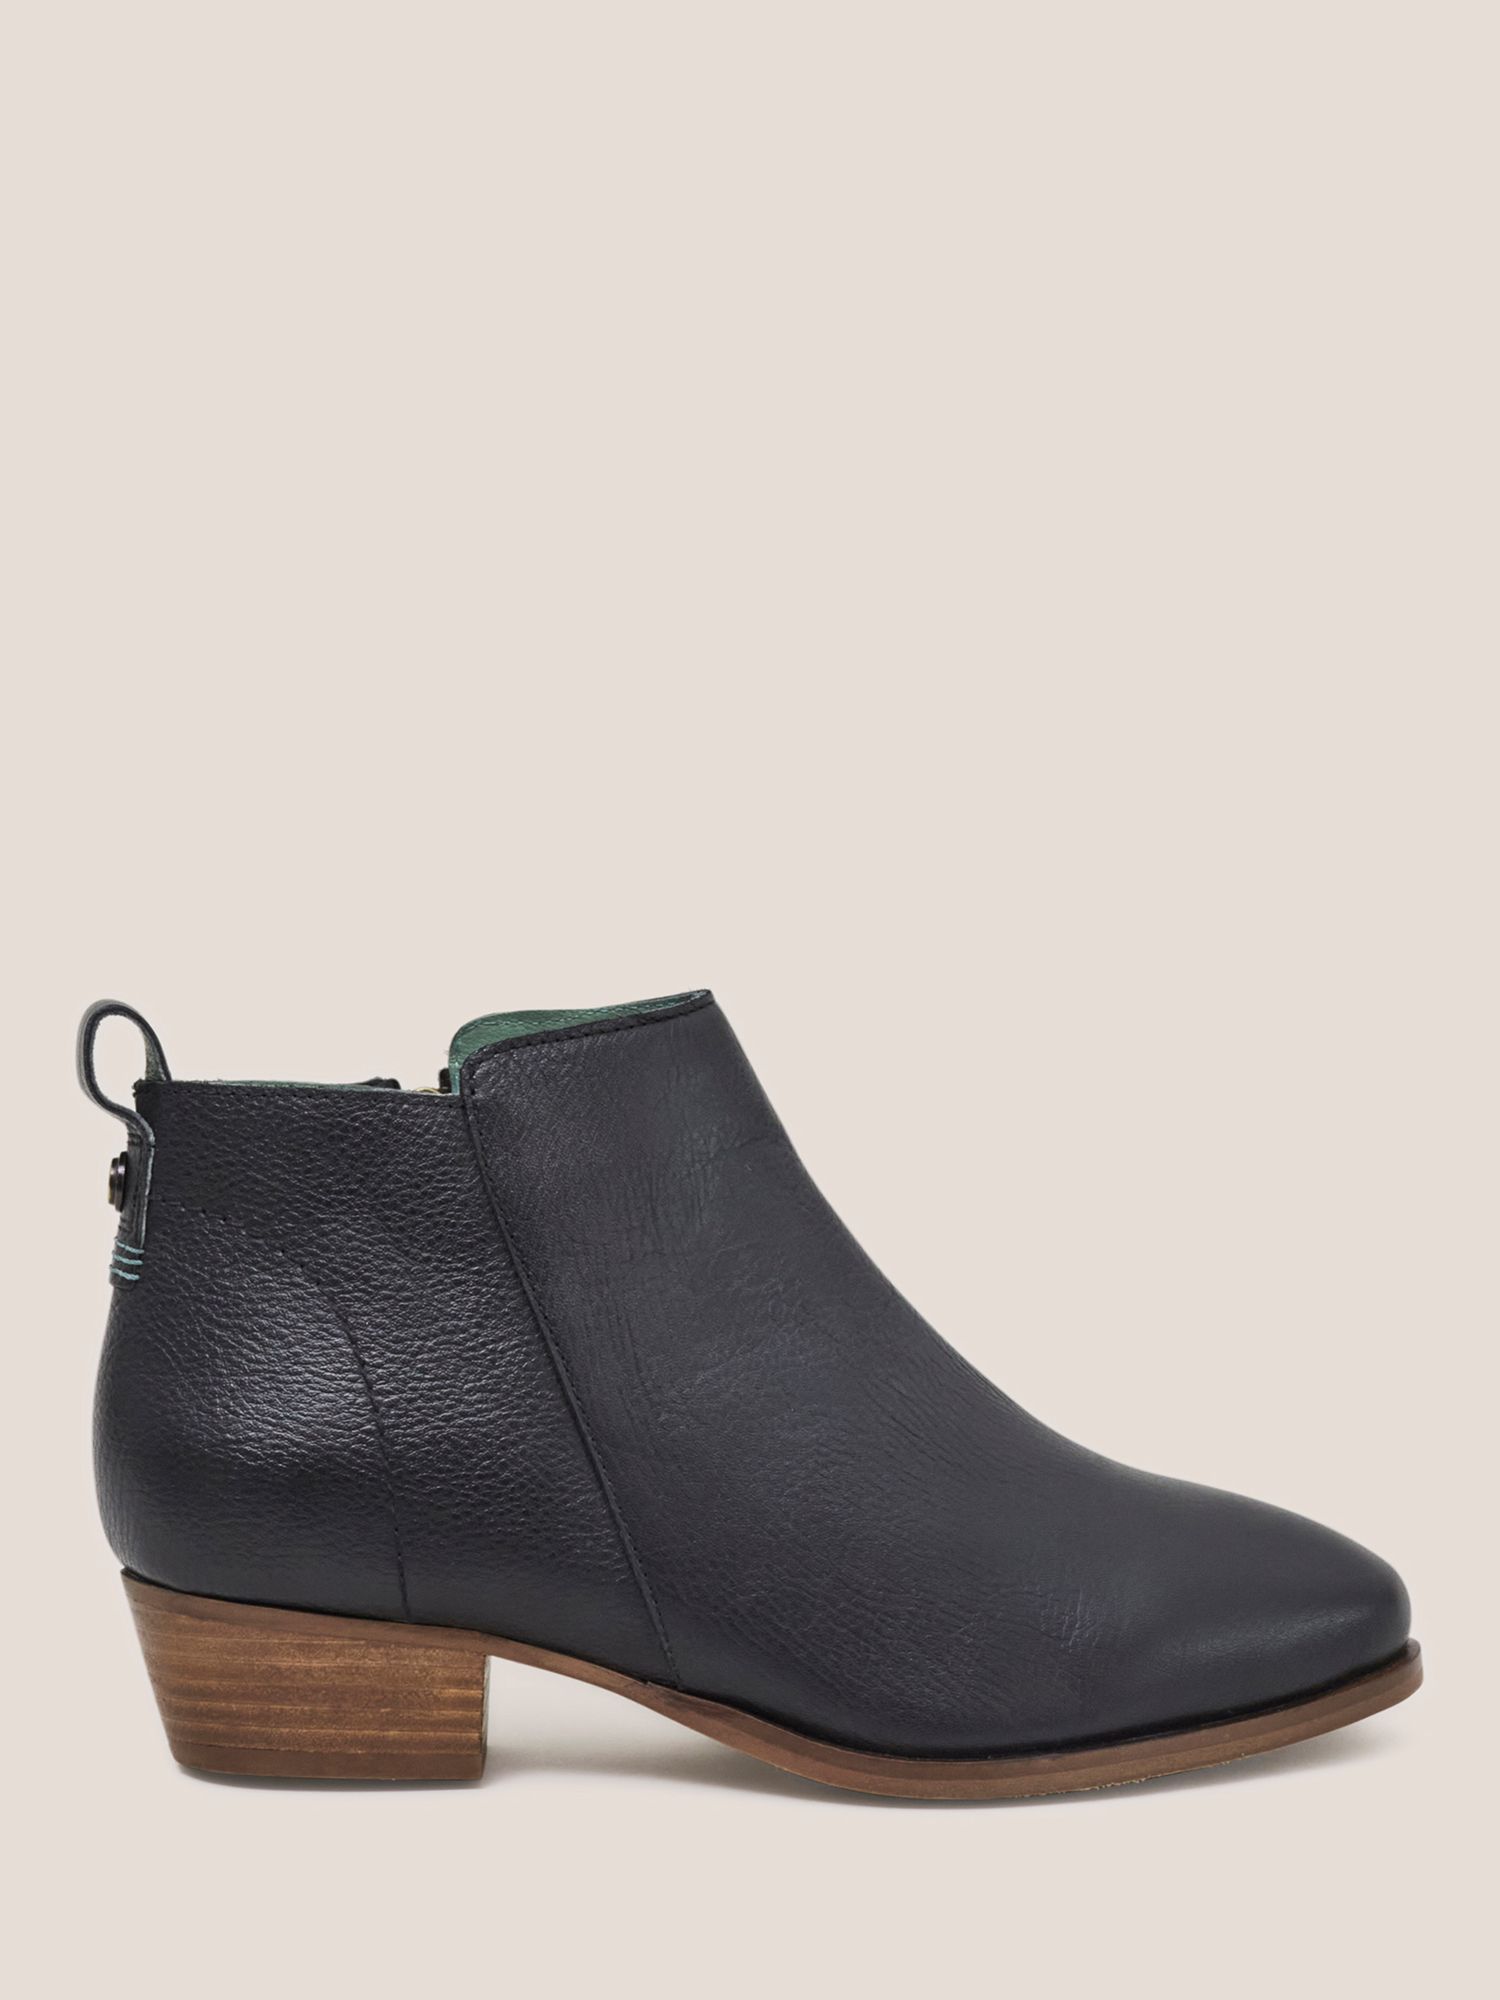 White Stuff Leather Ankle Boots, Black at John Lewis & Partners